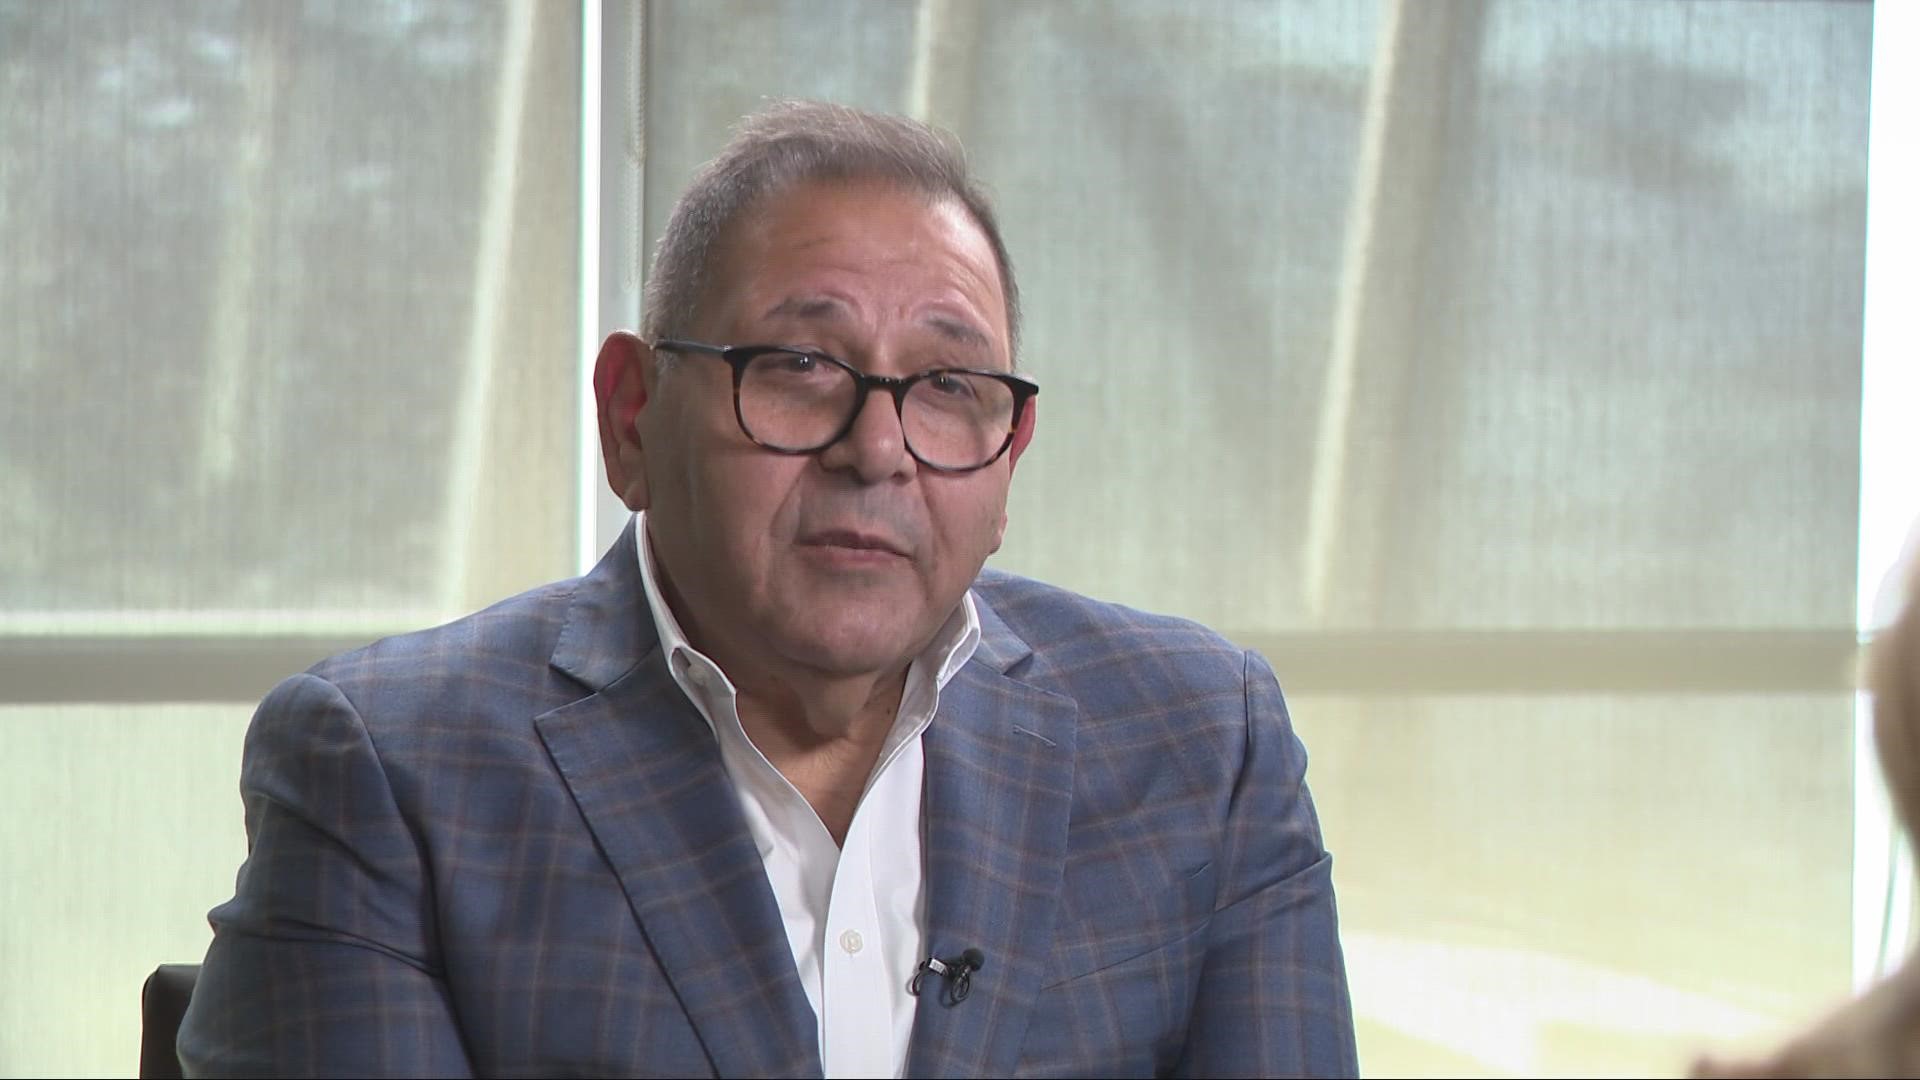 Speaking with 3News' Monica Robins, former MetroHealth CEO Akram Boutros discussed the misappropriation of funds accusations that led to his firing.